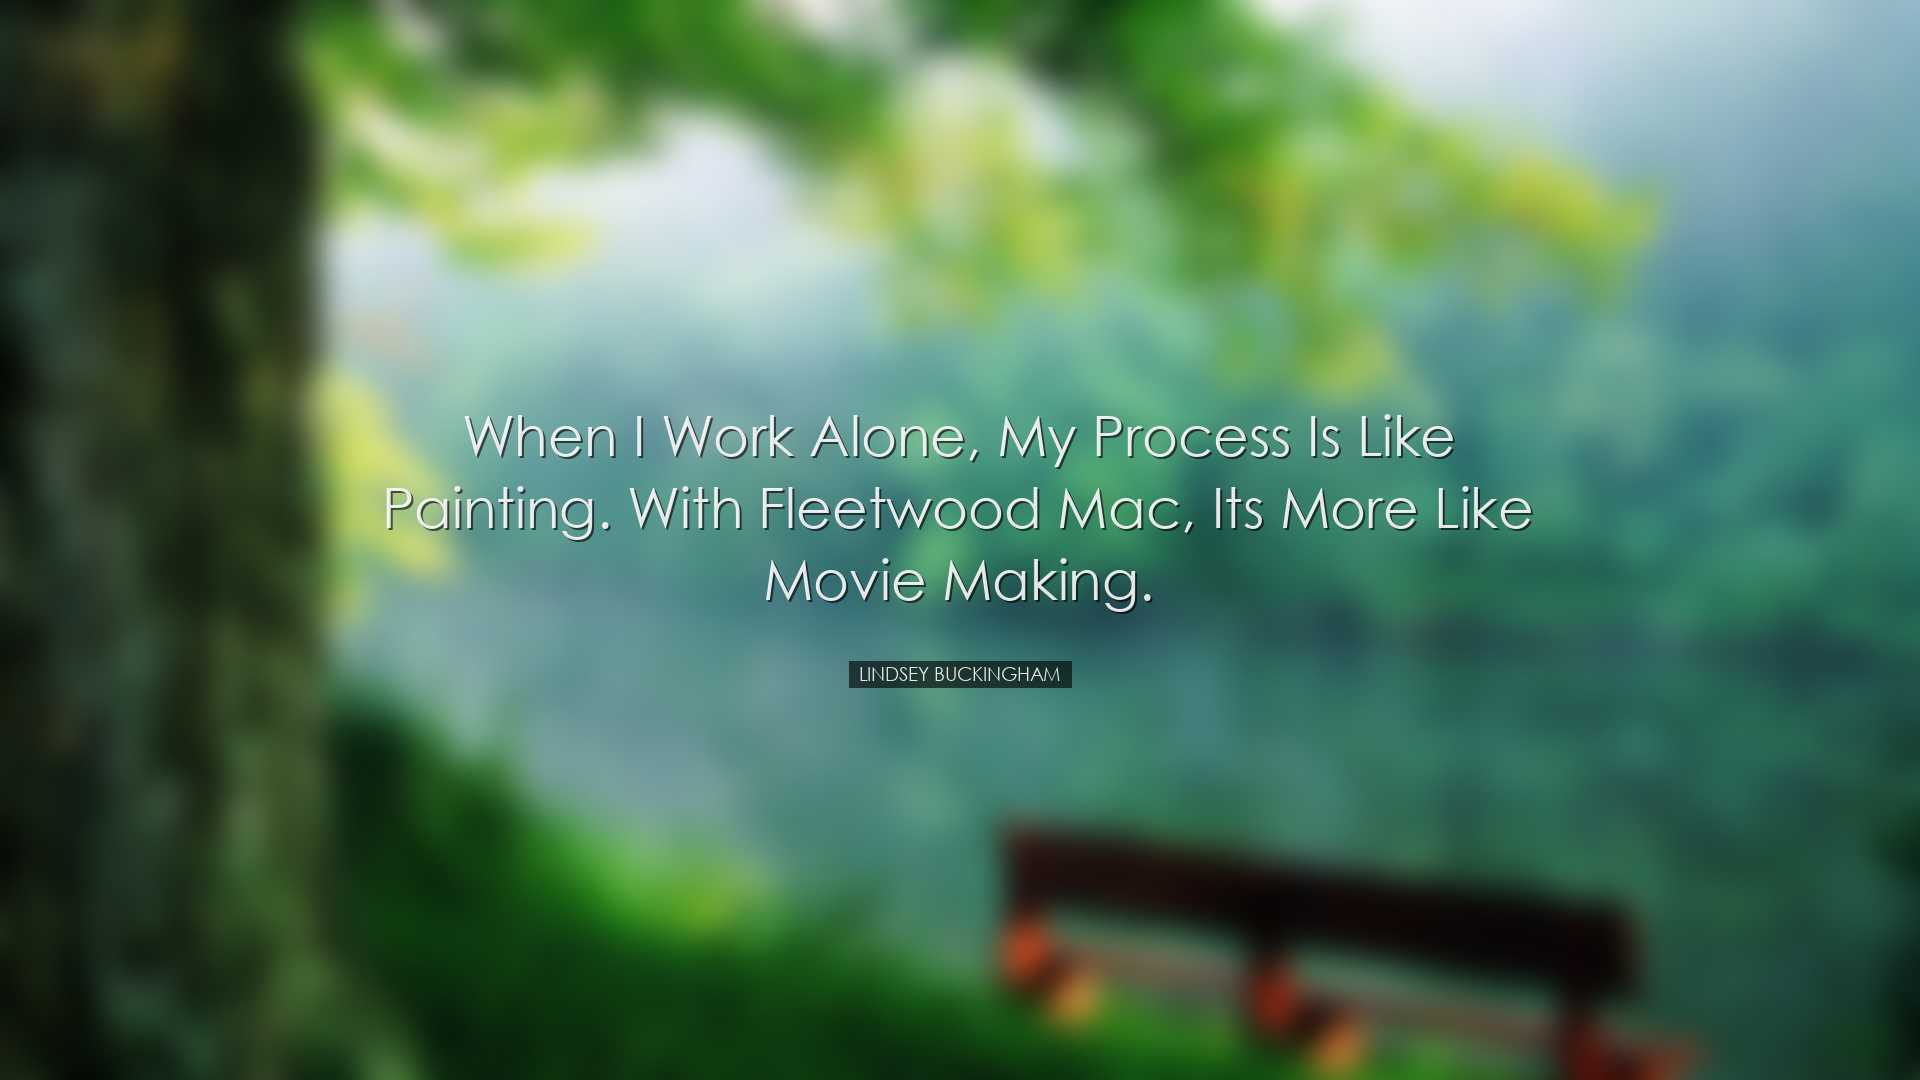 When I work alone, my process is like painting. With Fleetwood Mac